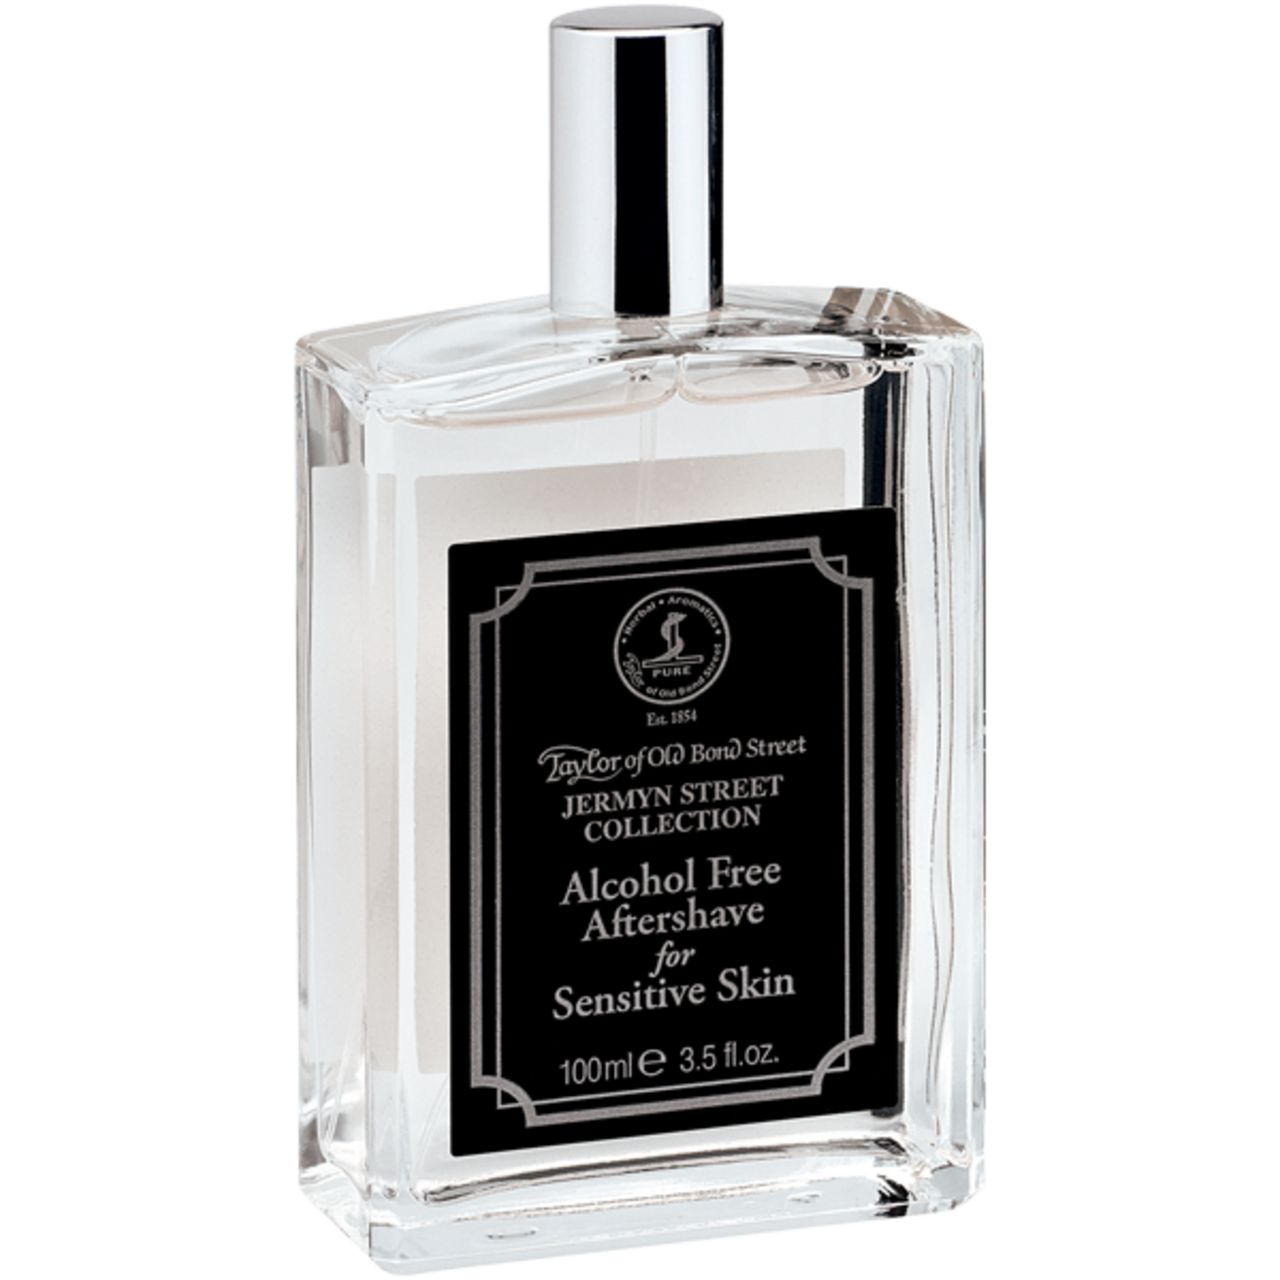 Taylor of Old Bond Street, Jermyn Street Collection Alcohol Free Aftershave for sensitive Skin